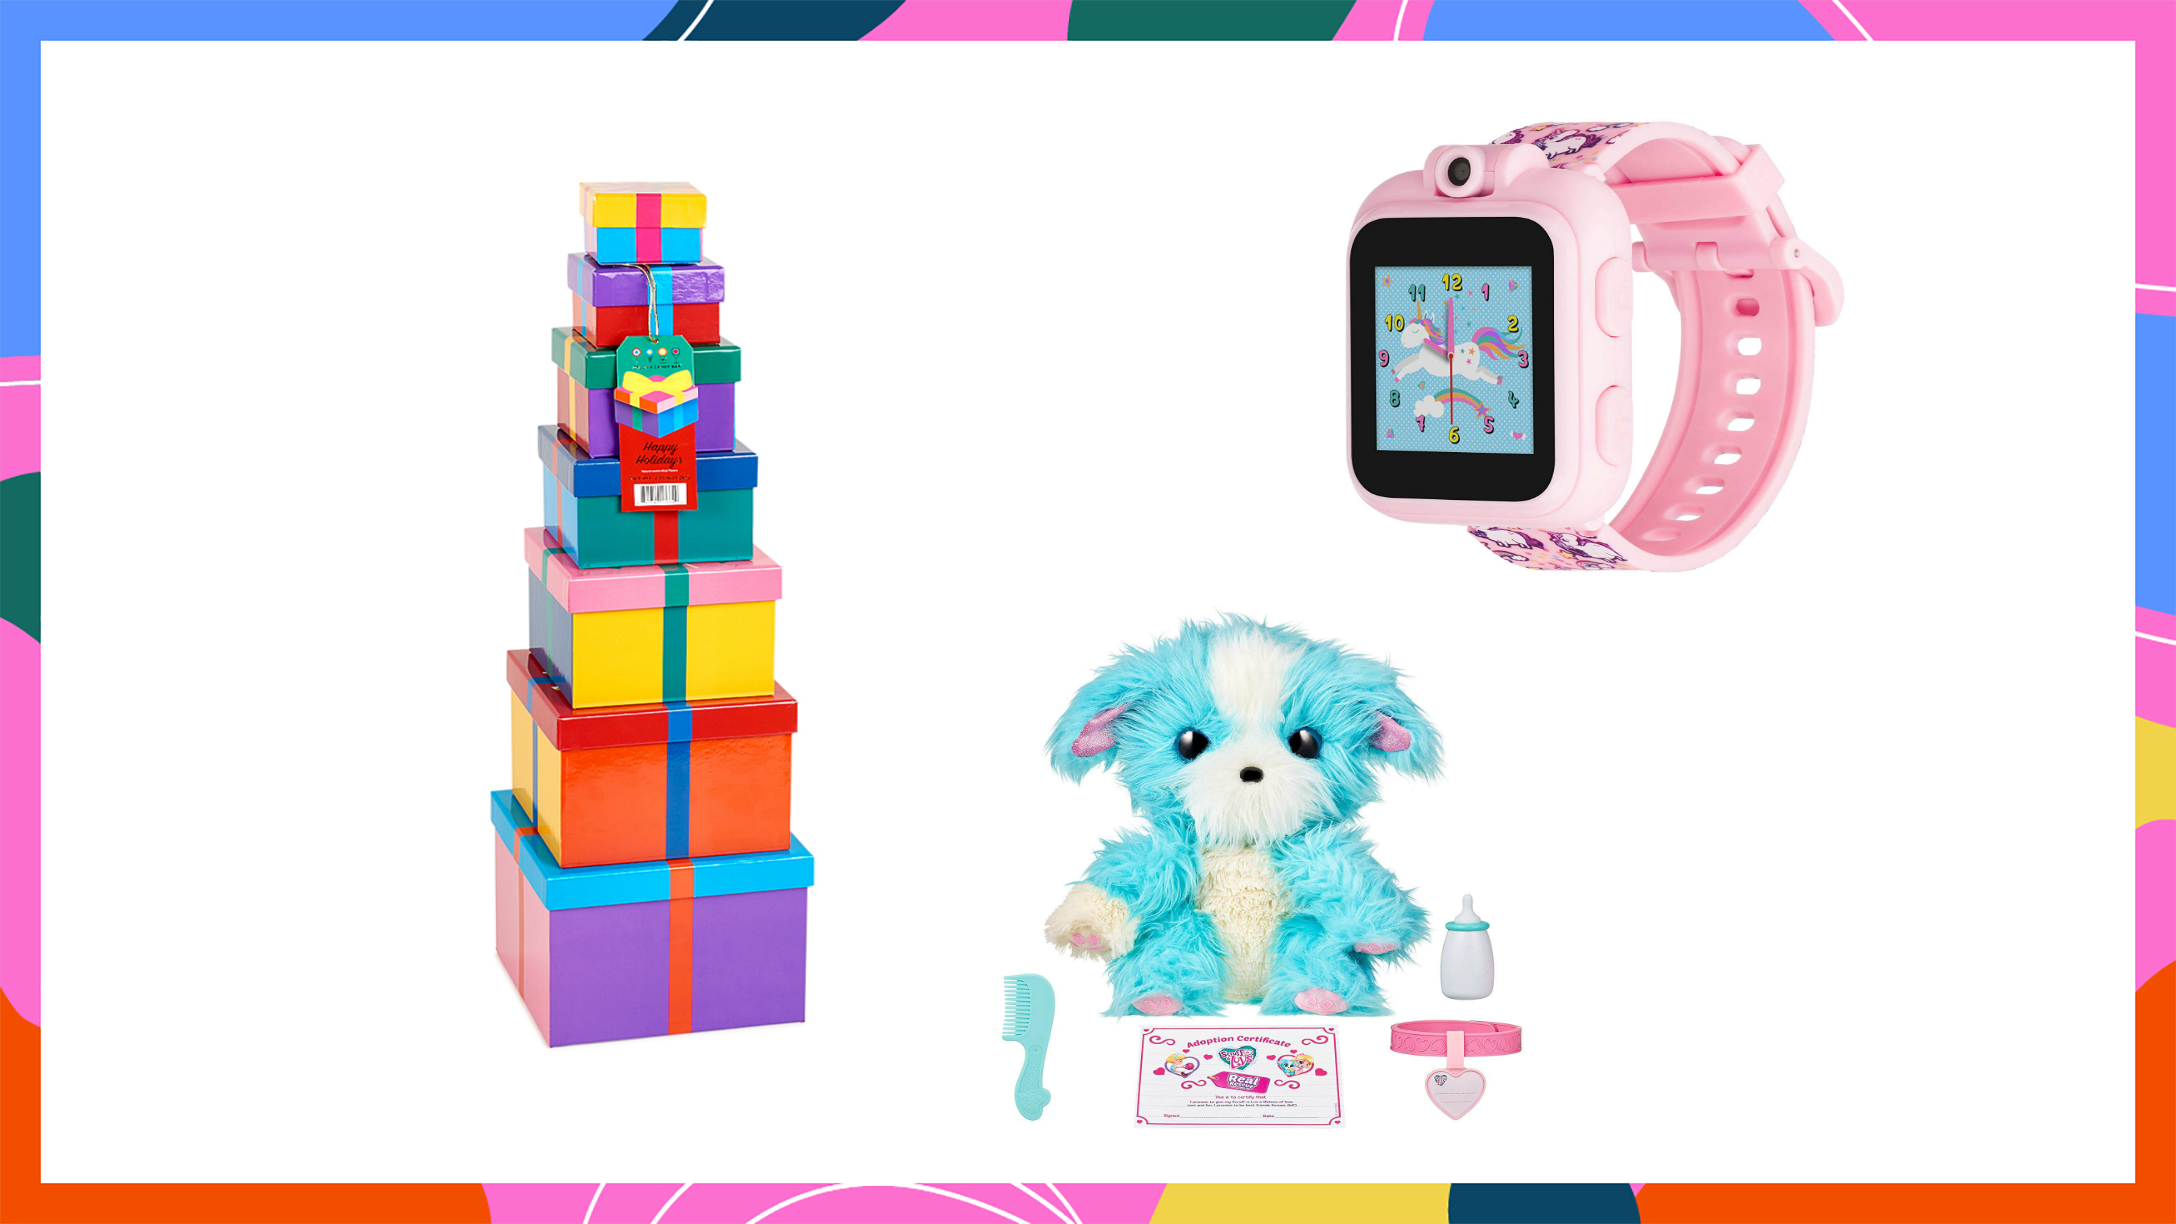 best kids electronic gifts